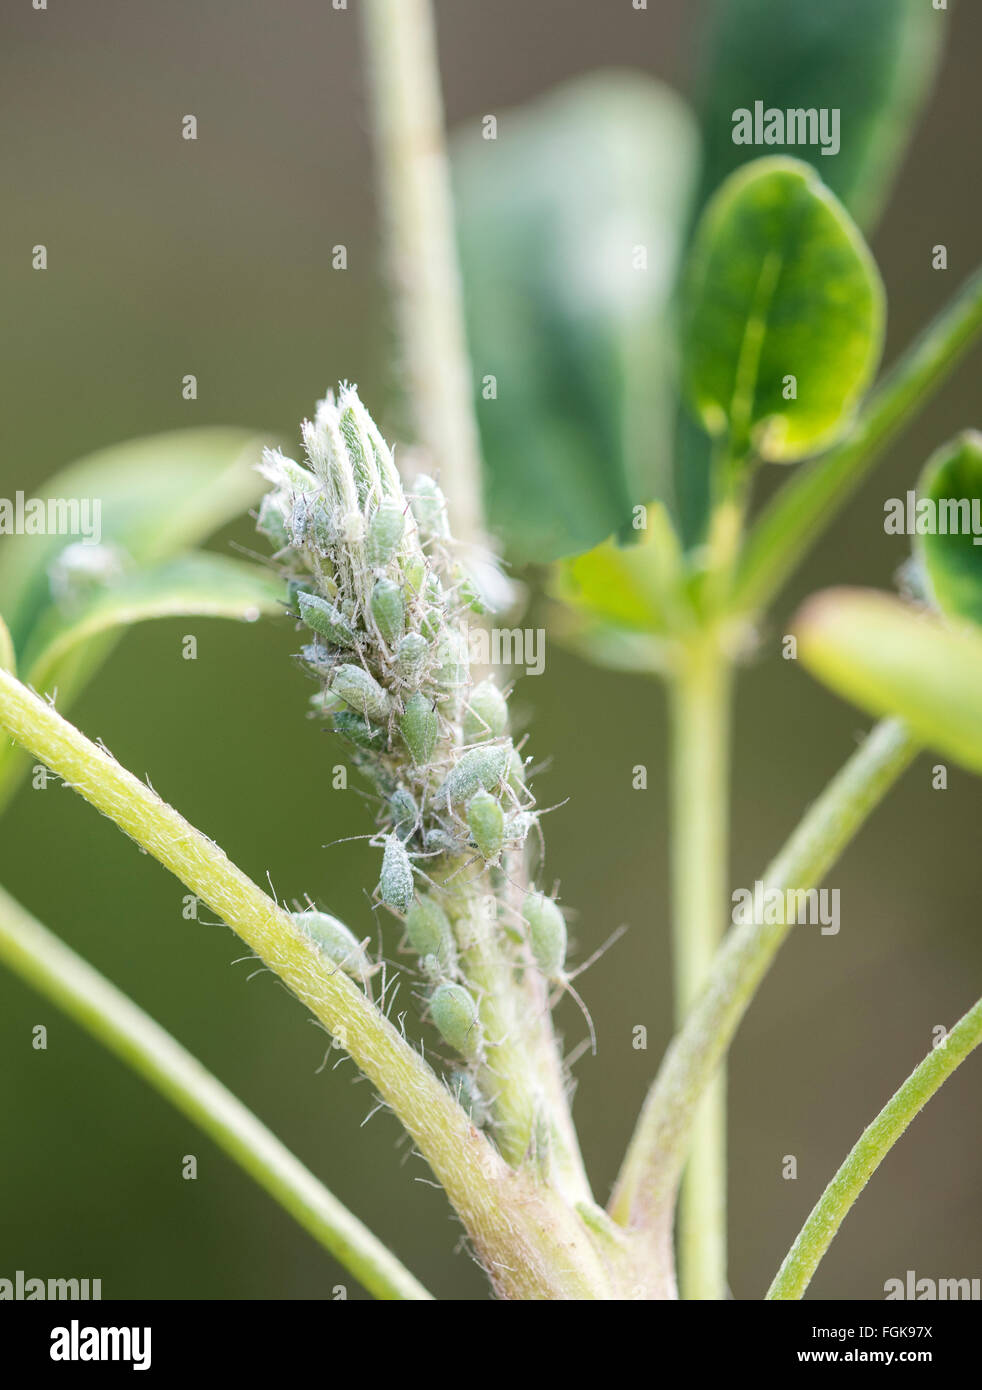 Aphids on Lupin plant Stock Photo